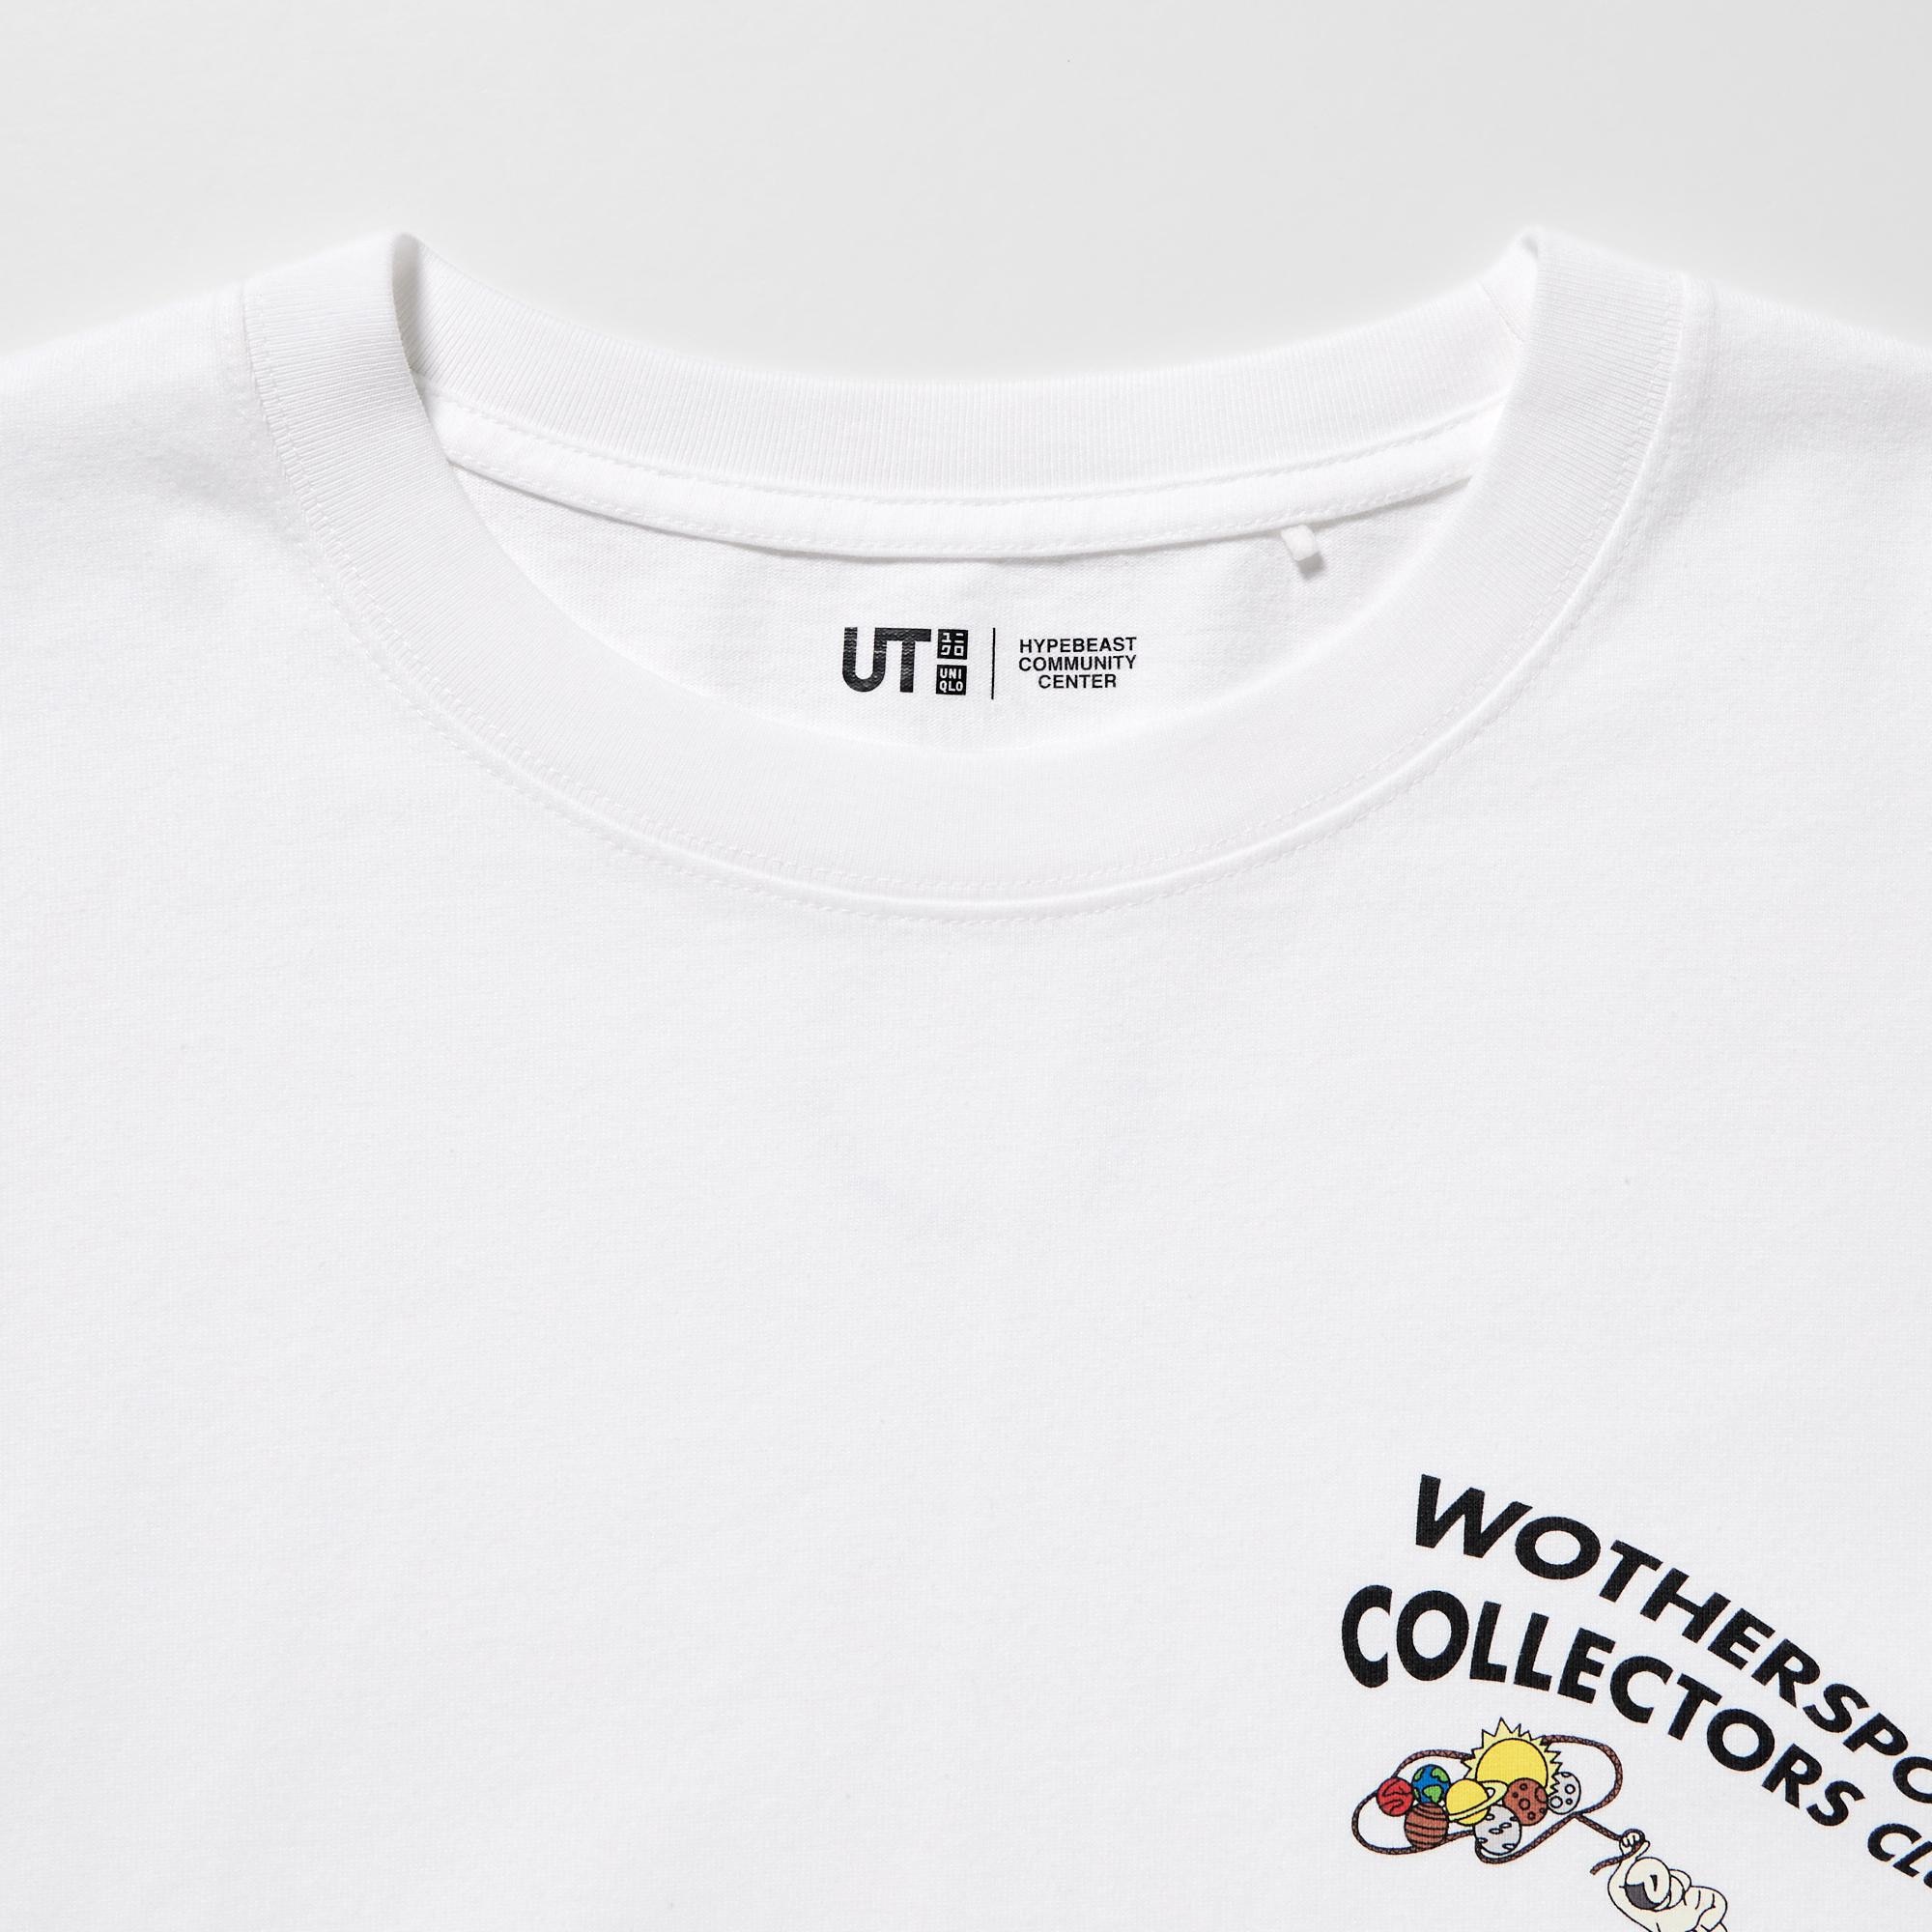 Hypebeast Community Center Long-Sleeve UT (Long-Sleeve Graphic T-Shirt)  (Sean Wotherspoon)